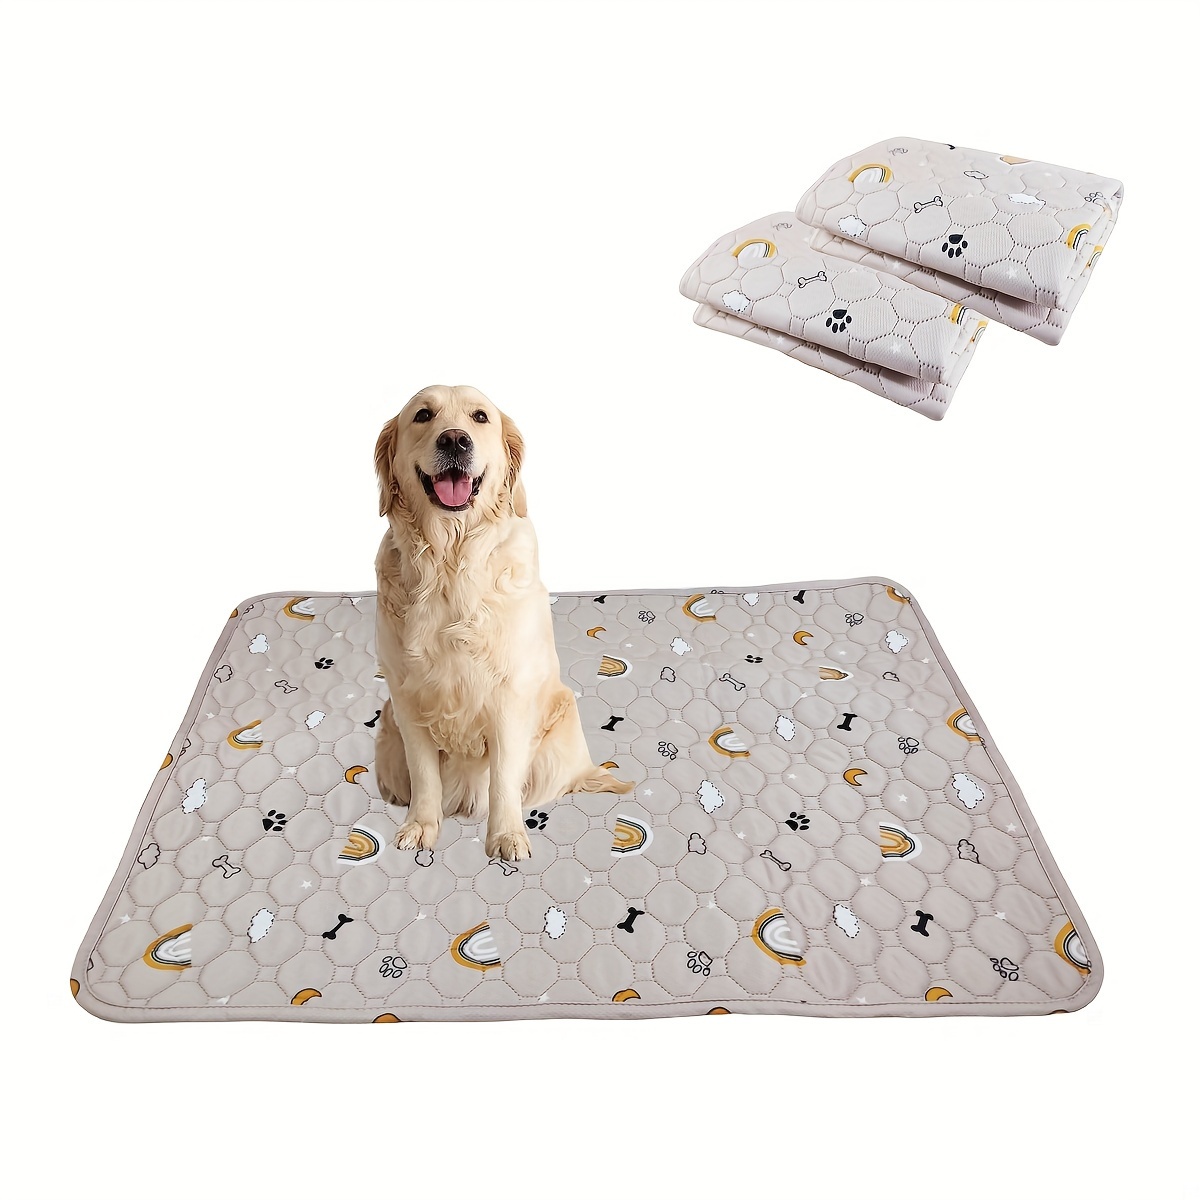 Drymate Potty Pad, Washable Puppy Training Mat, Absorbent Mat Contains  Liquids, Protects Floors, Washable/Reusable/Durable & Reviews